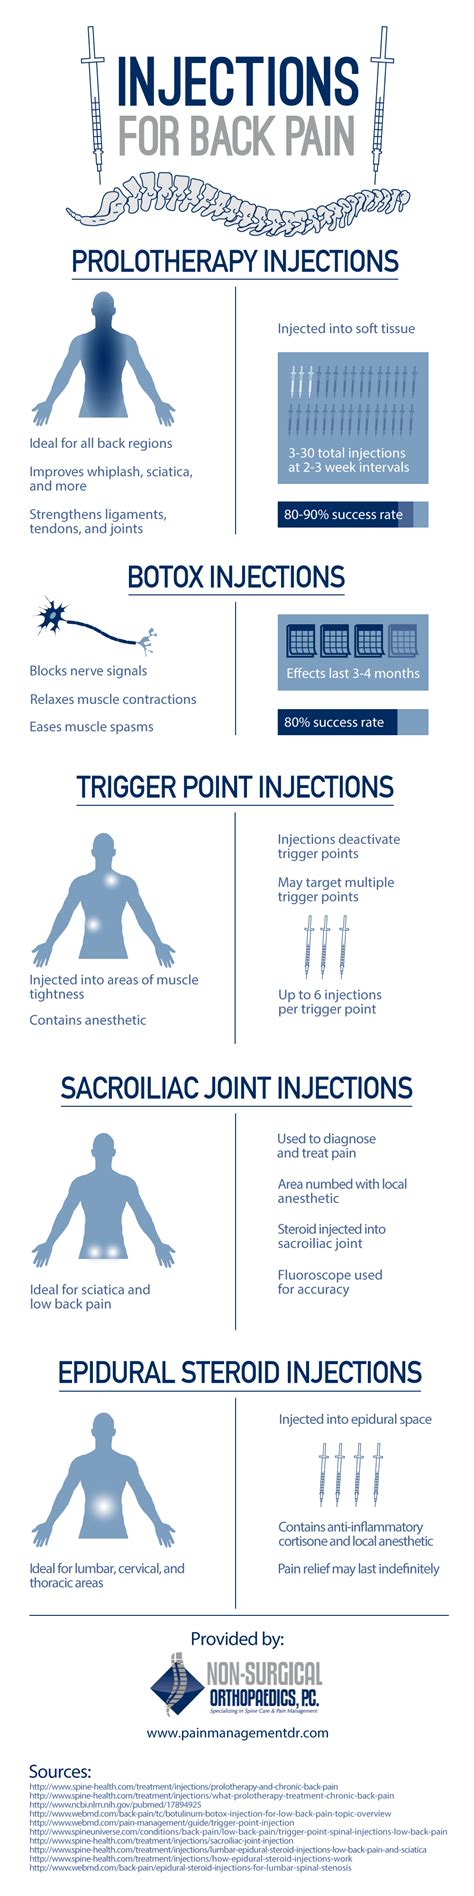 Injections into the hip joint are often used to relieve pain and delay surgery. Prolotherapy Pros and Cons | HRFnd